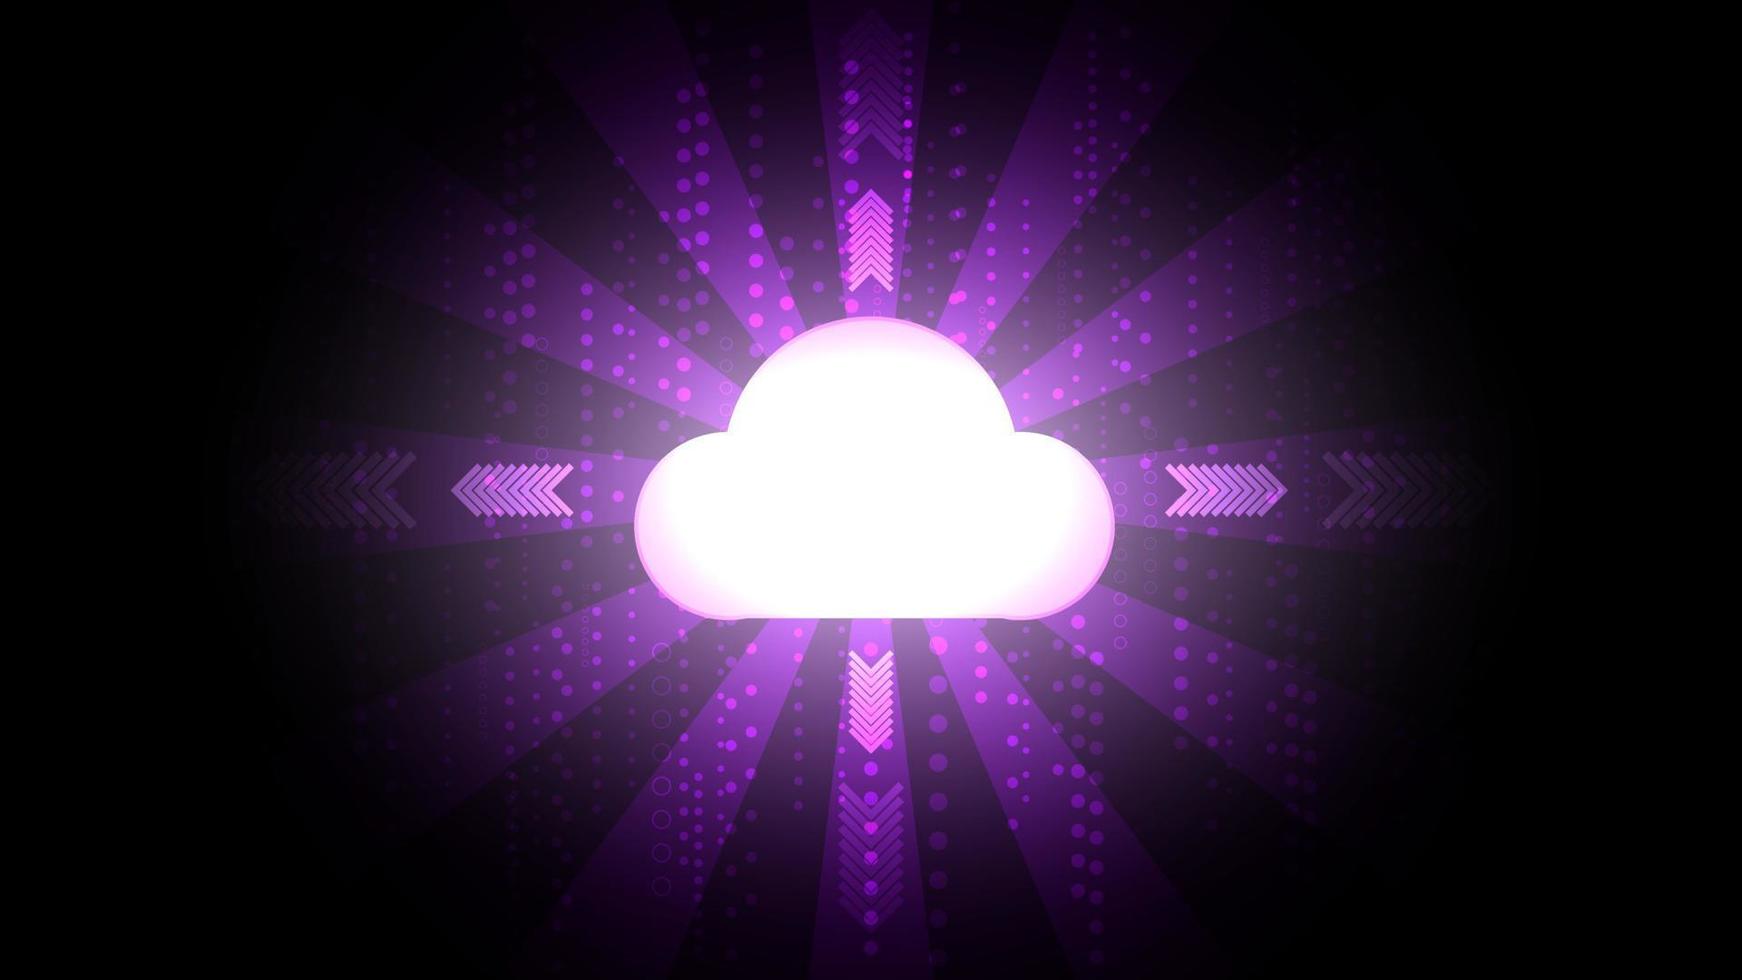 abstract technology cloud data storage, digital communication, technology data, online network purple background illustration, perfect for backdrop, wallpaper, background, banner vector